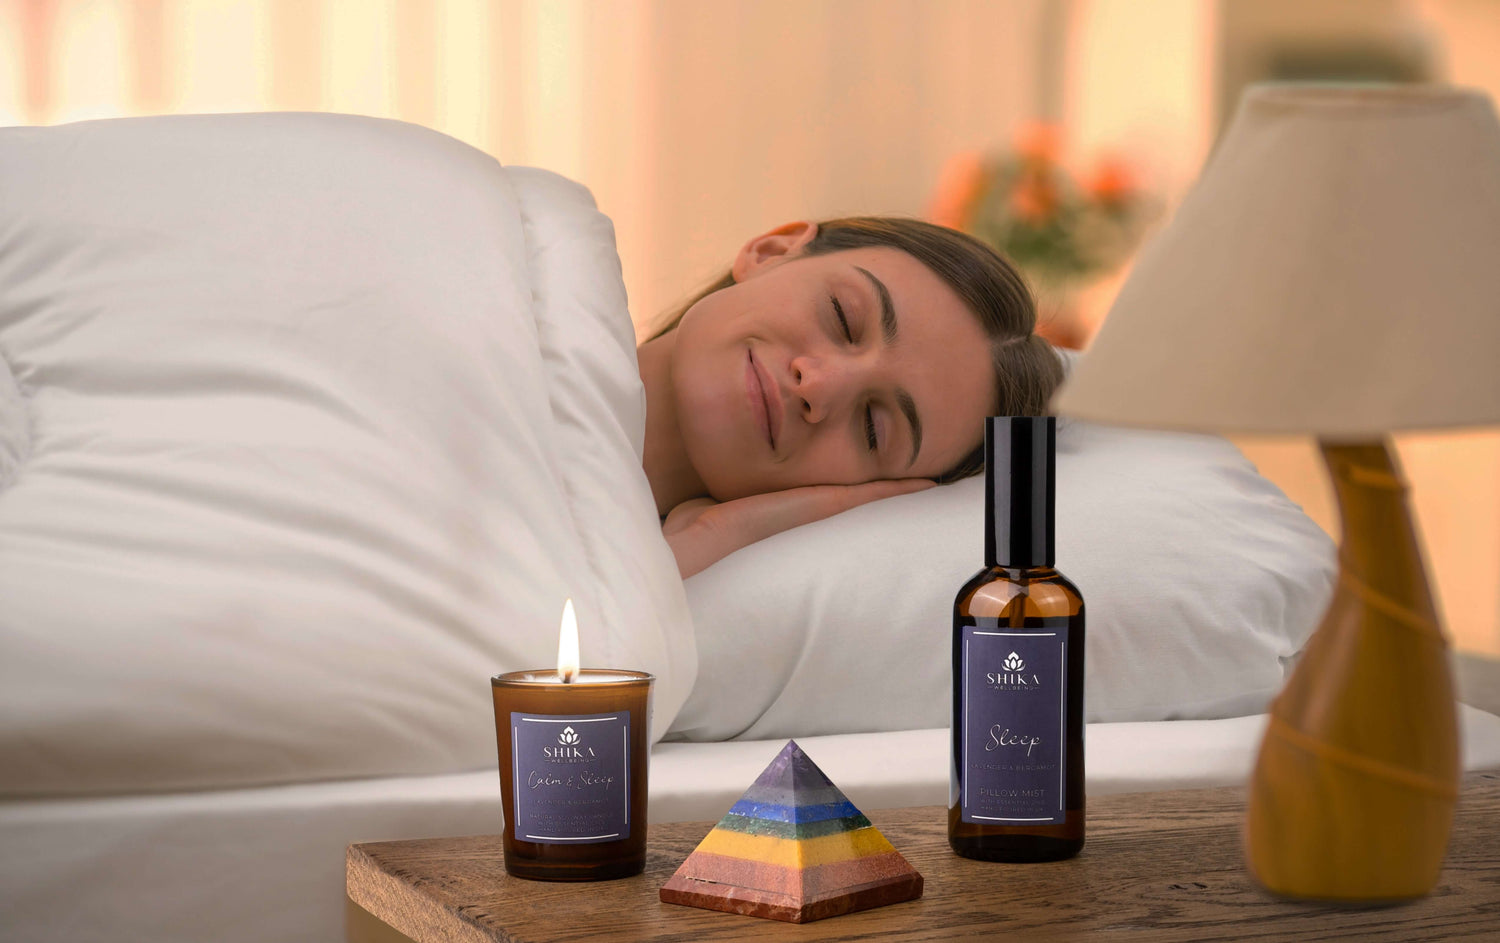 Expertience relaxation and better sleep with the mood boosting Shika Wellbeing Sleep gift set. Weighted eye pillow to help blocking out the light while you are resting, sleep pillow mist to help to promote better sleep, a sleep candle to calm your mind a